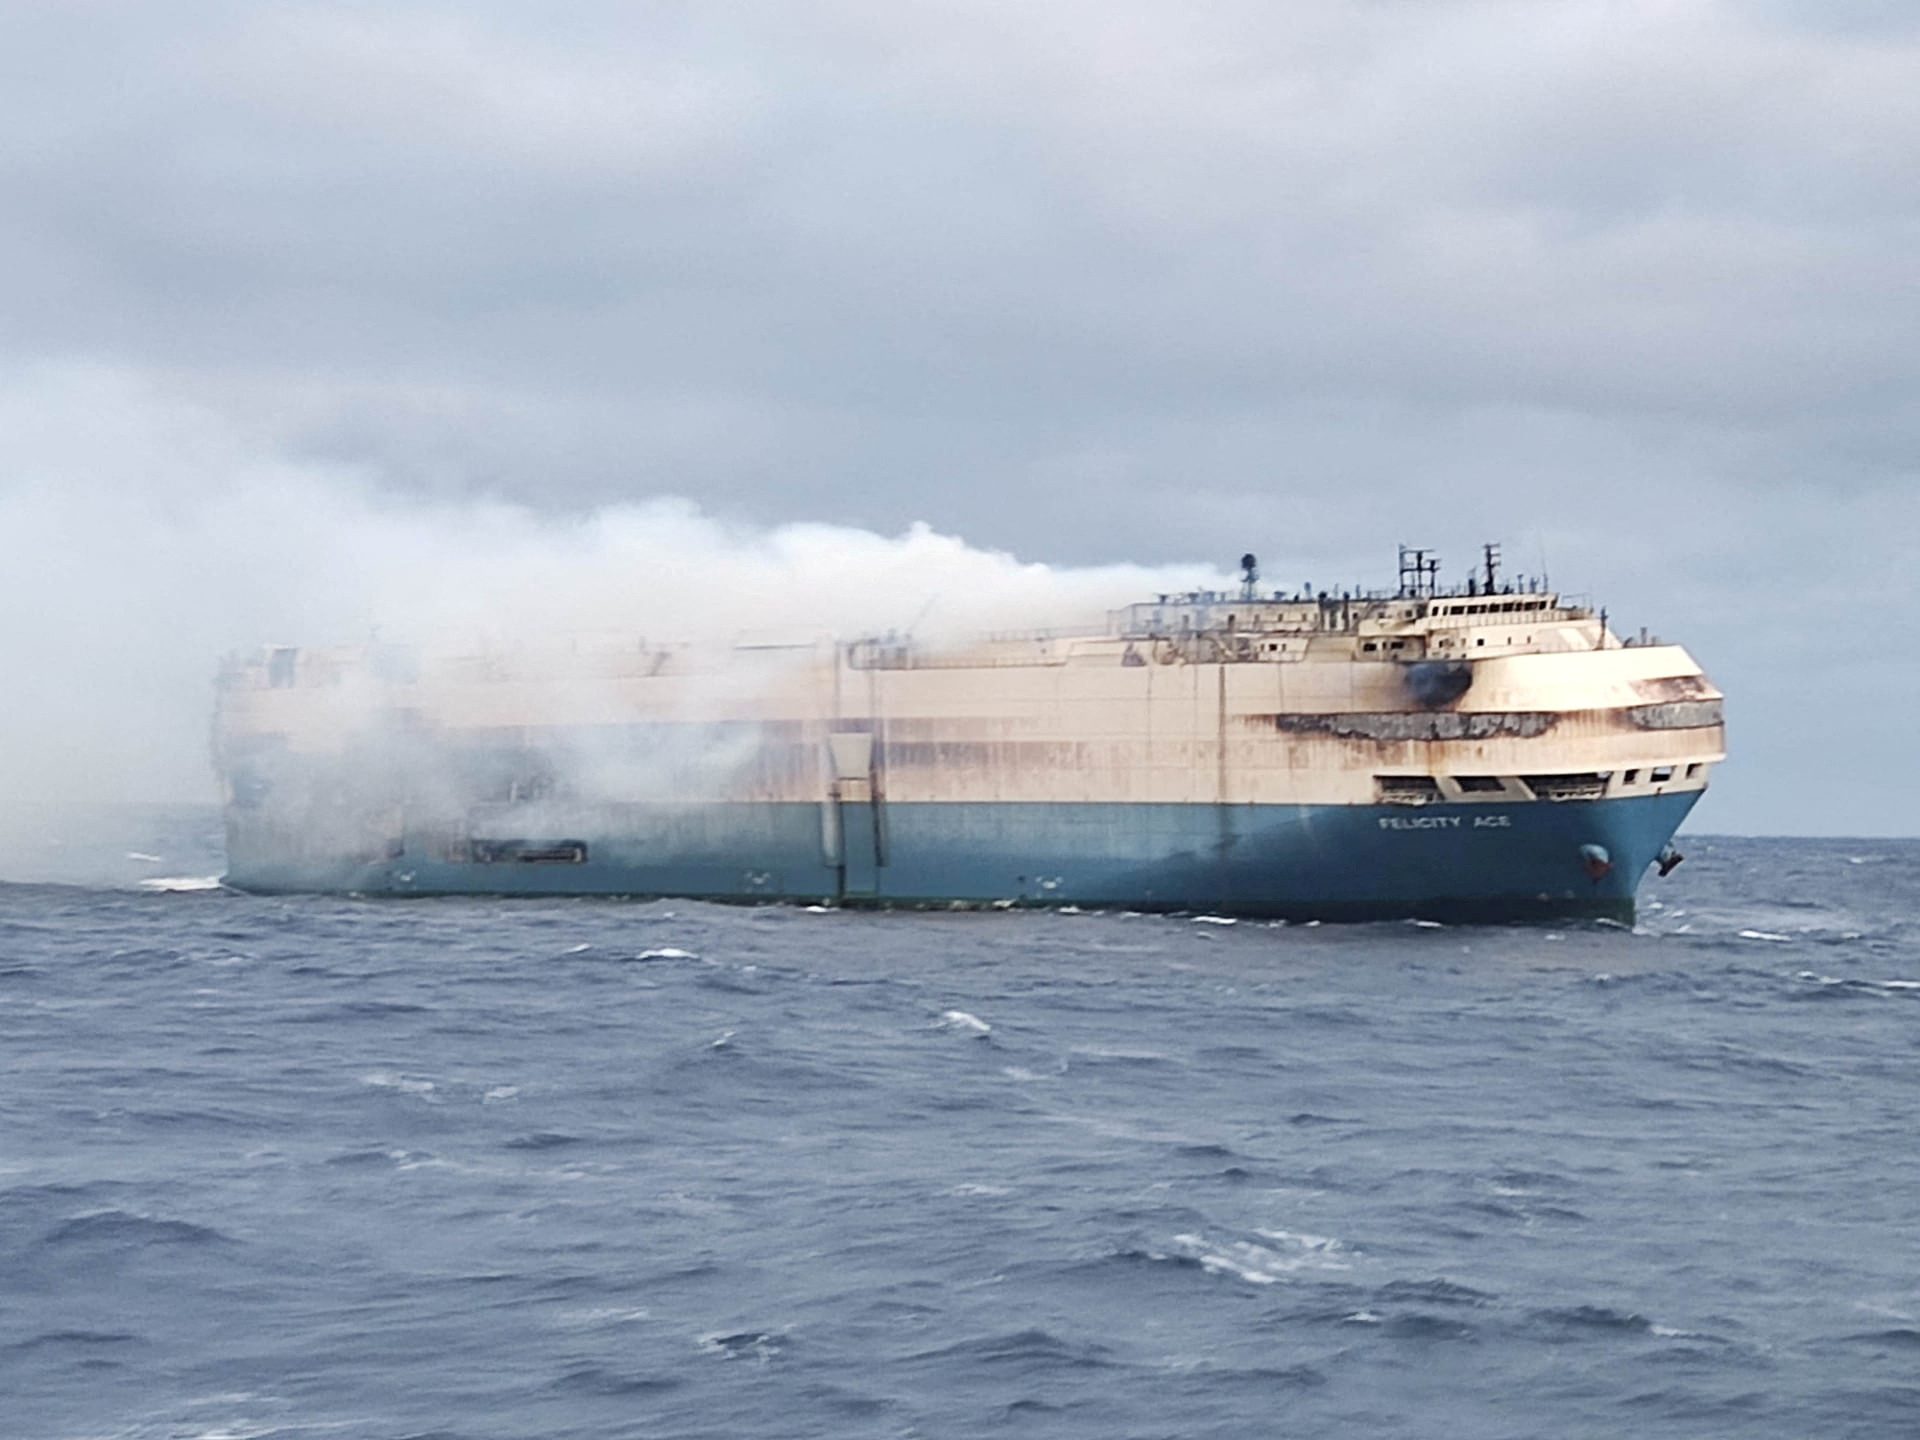 Lithium-ion Batteries From Electric Vehicles Aboard The Felicity Ace Are Keeping The Fire Alive